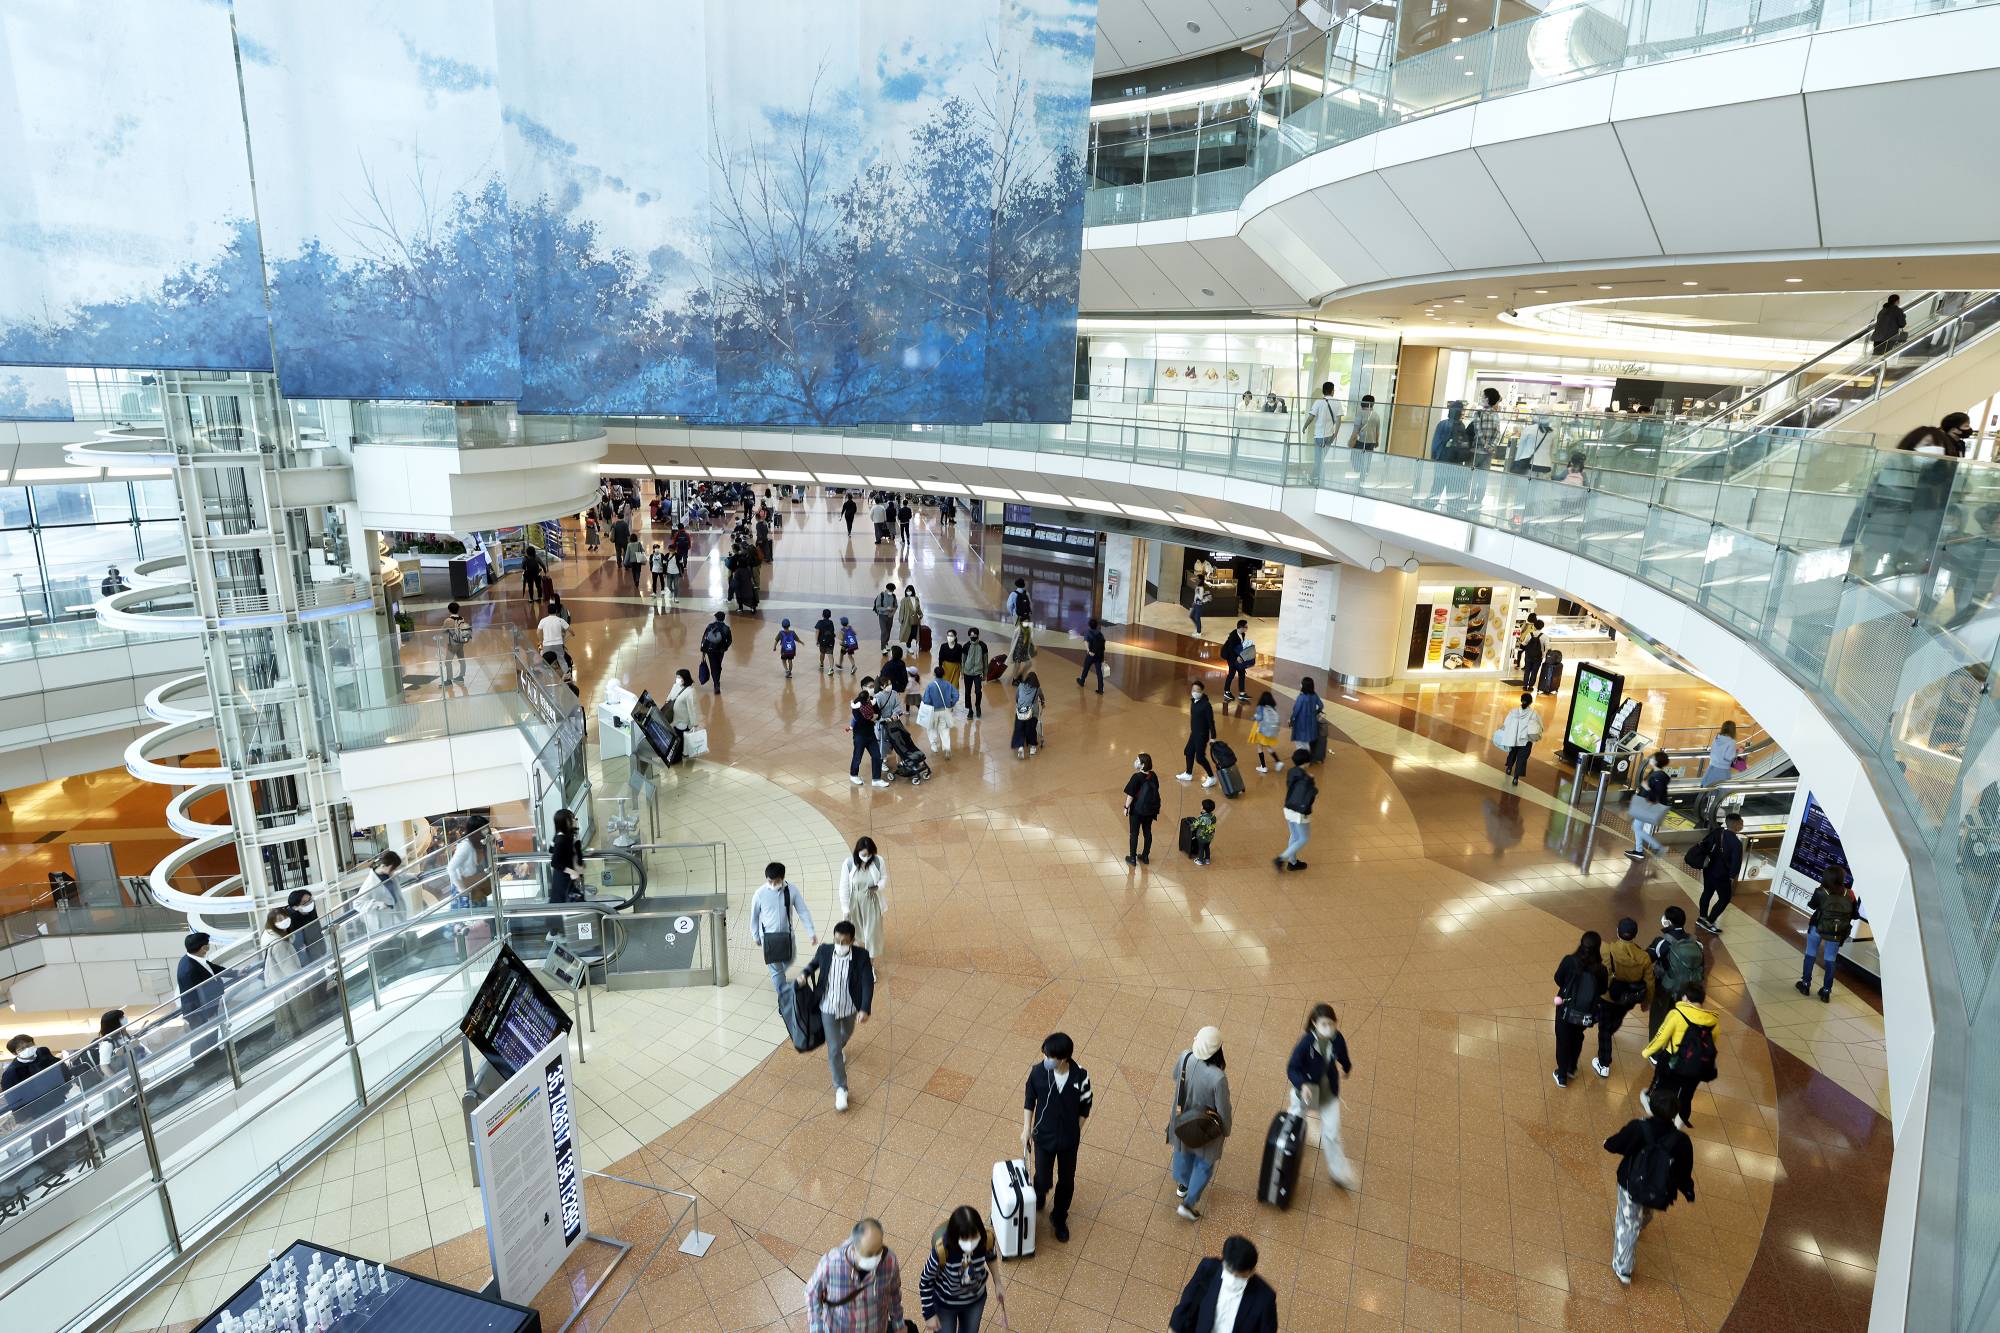 Haneda Airport on Friday. With the yen weakening, traveling to Japan is more affordable for foreign tourists — but the nation isn’t able to cash in due to COVID-19 border restrictions. | BLOOMBERG